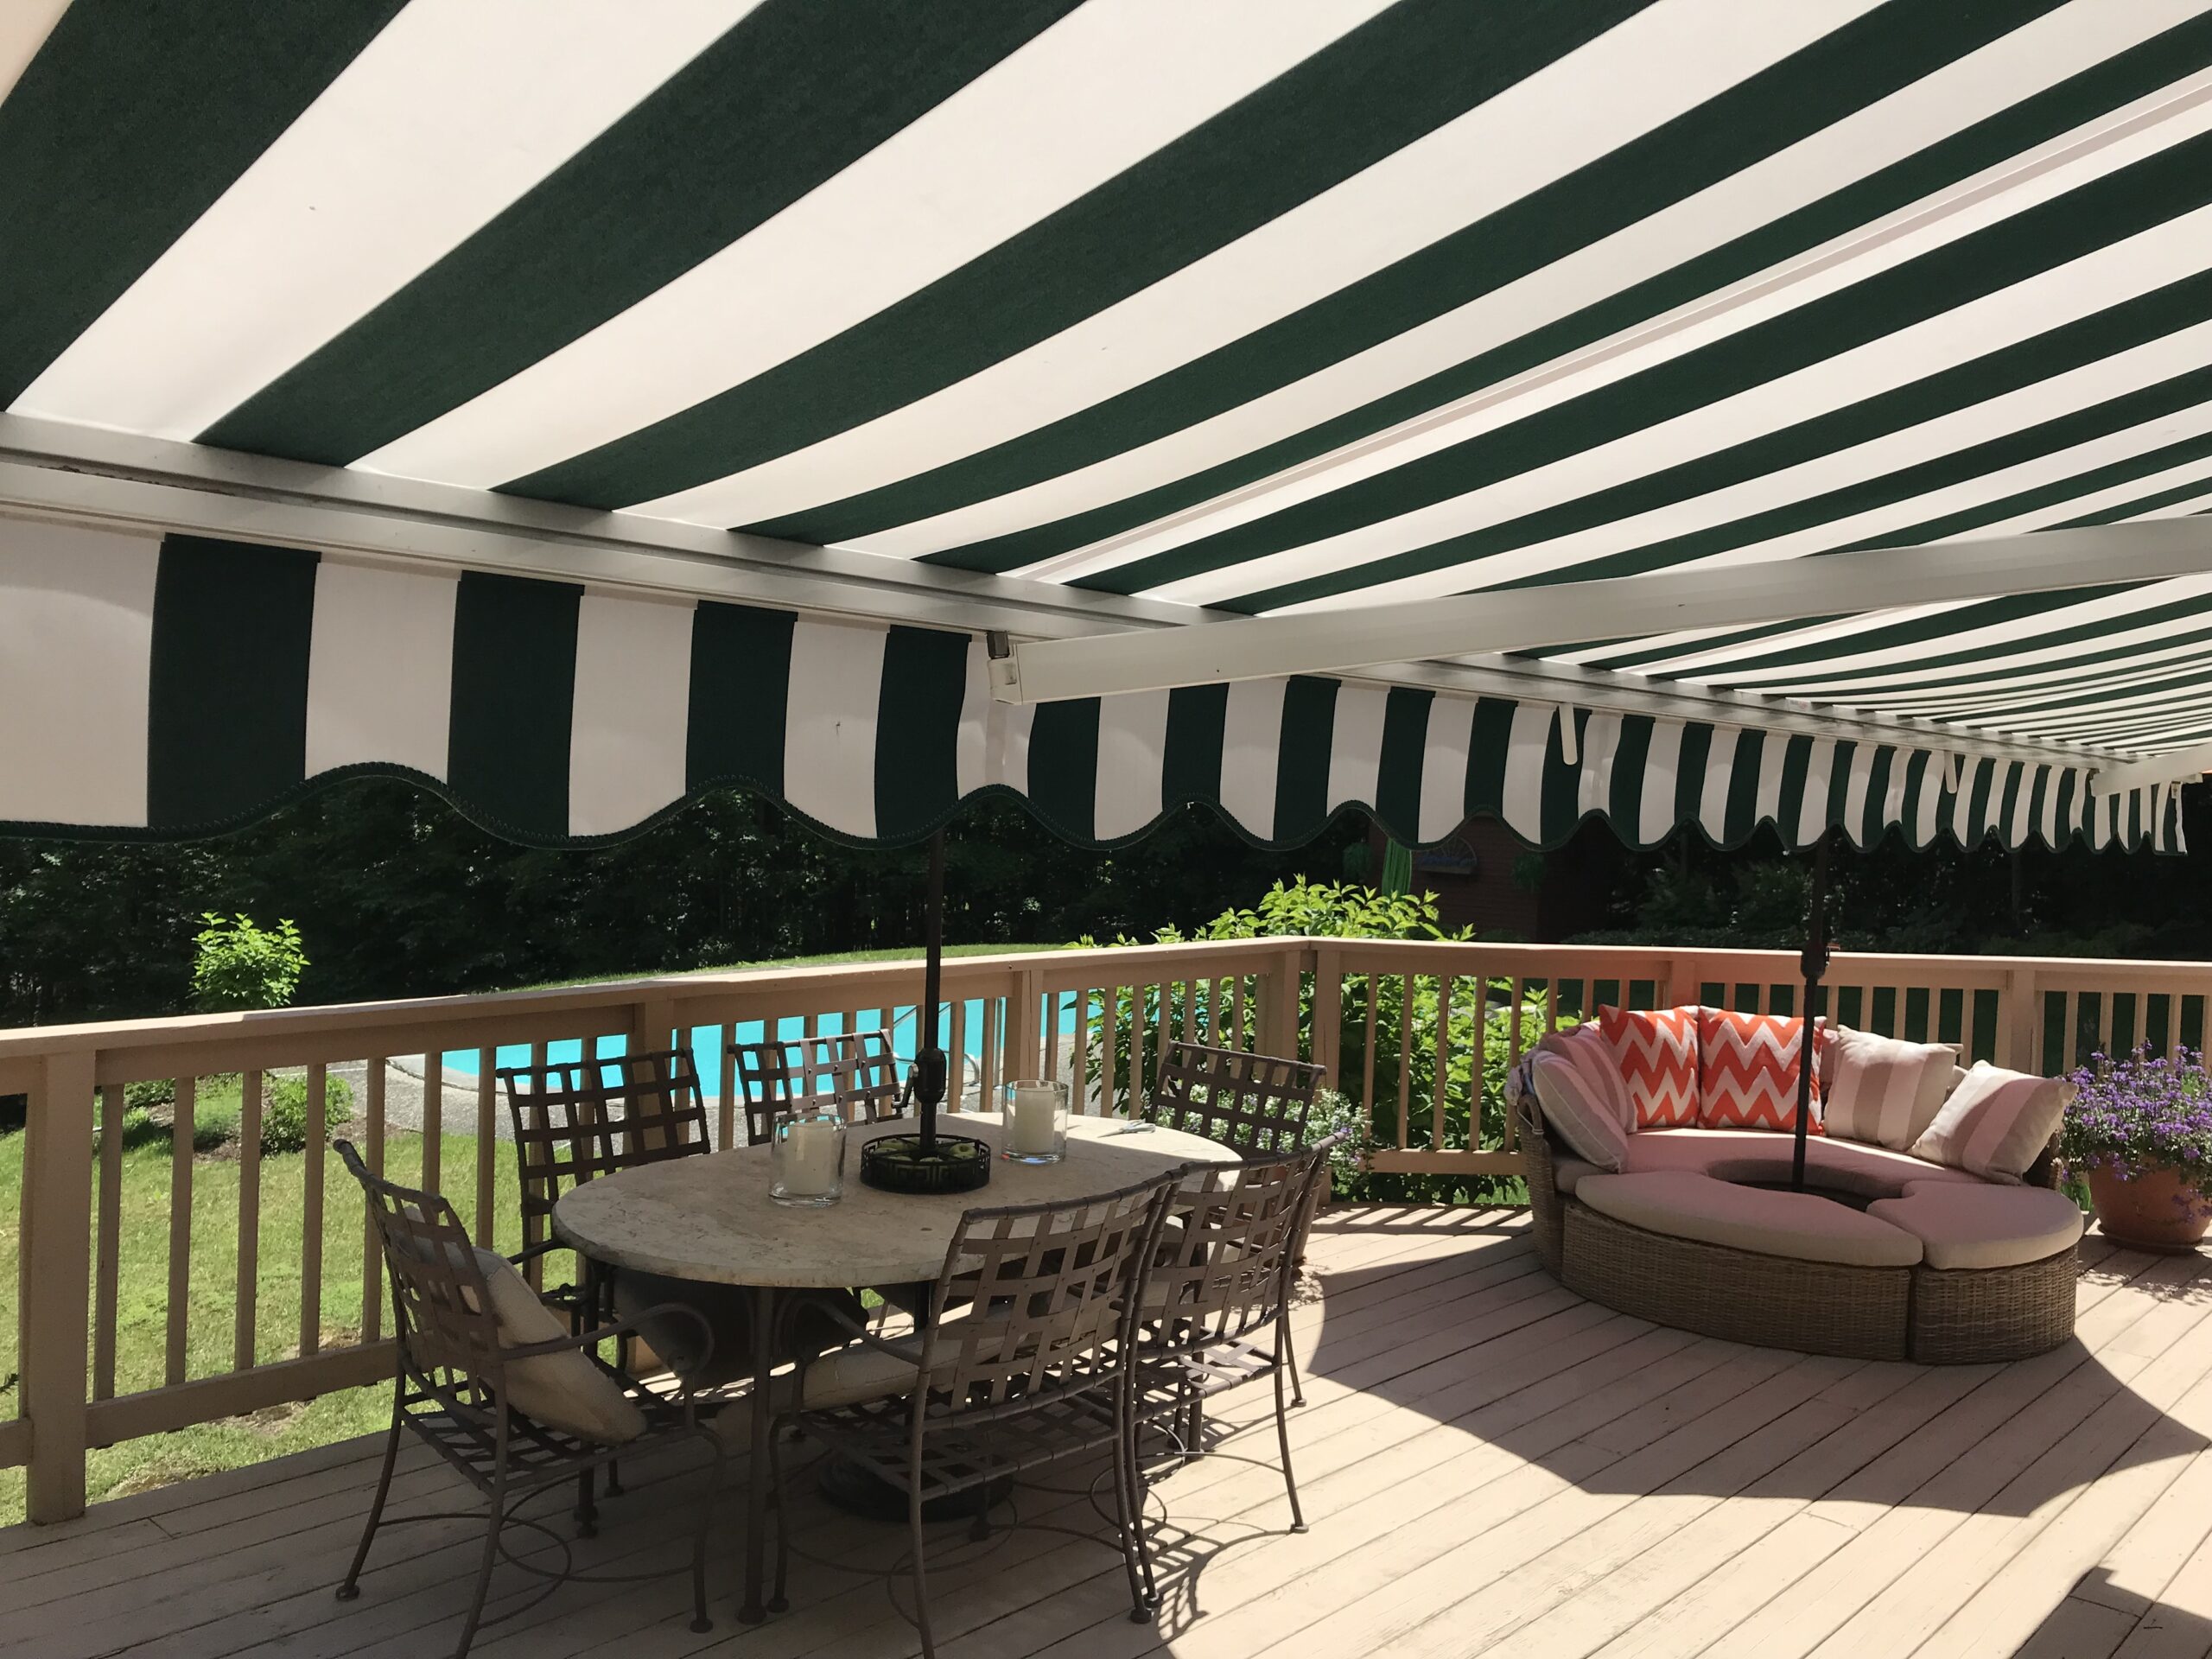 Striped green and white awning over deck